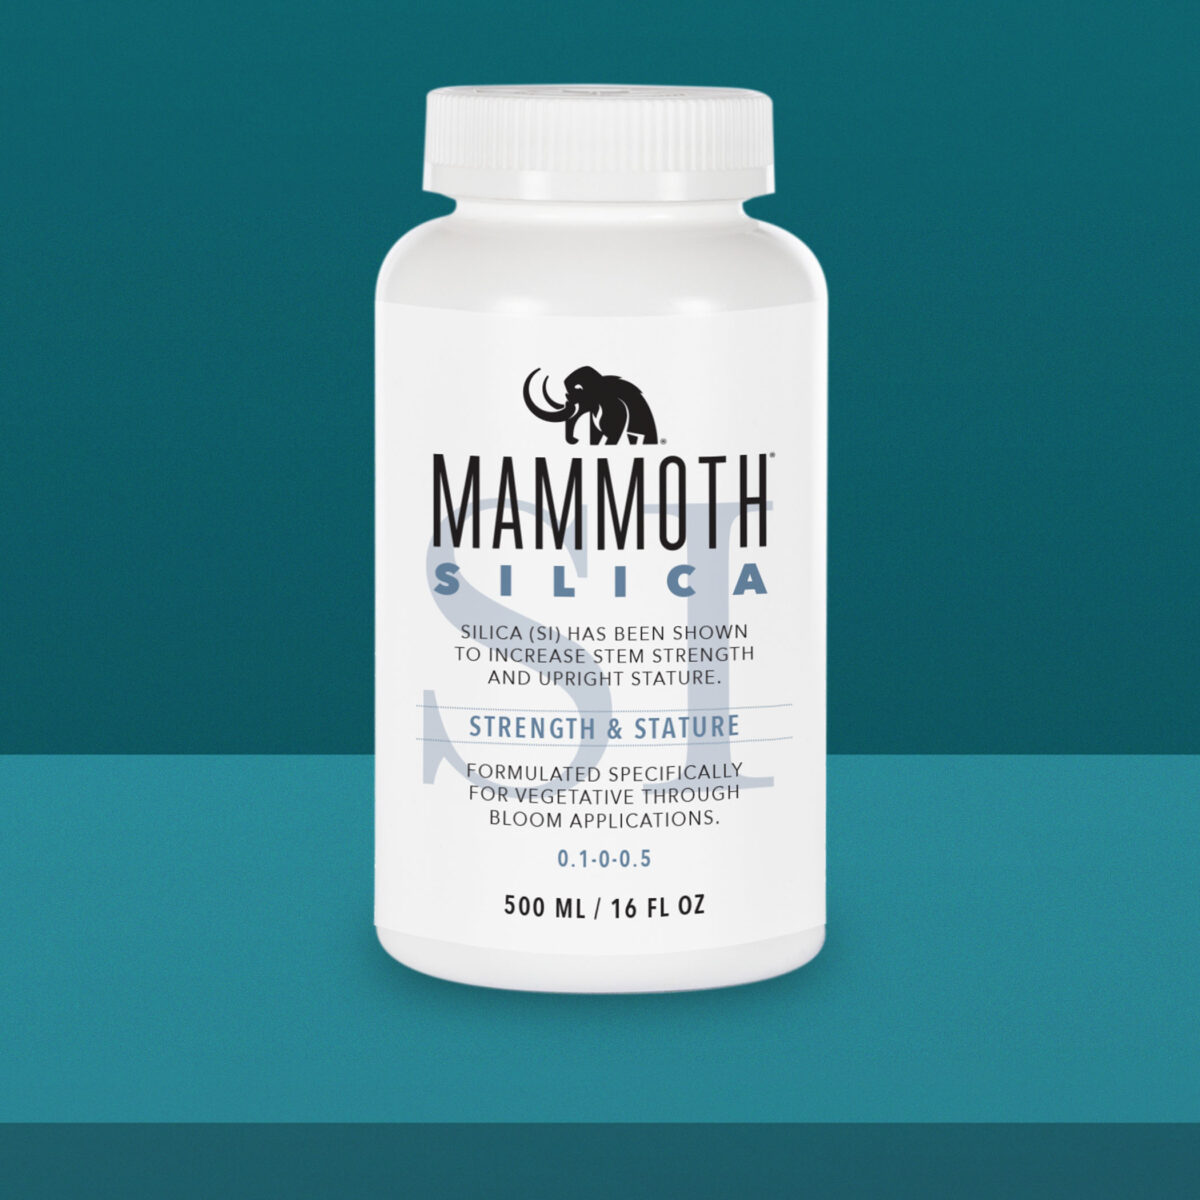 Mammoth Silica 500mL Product Image